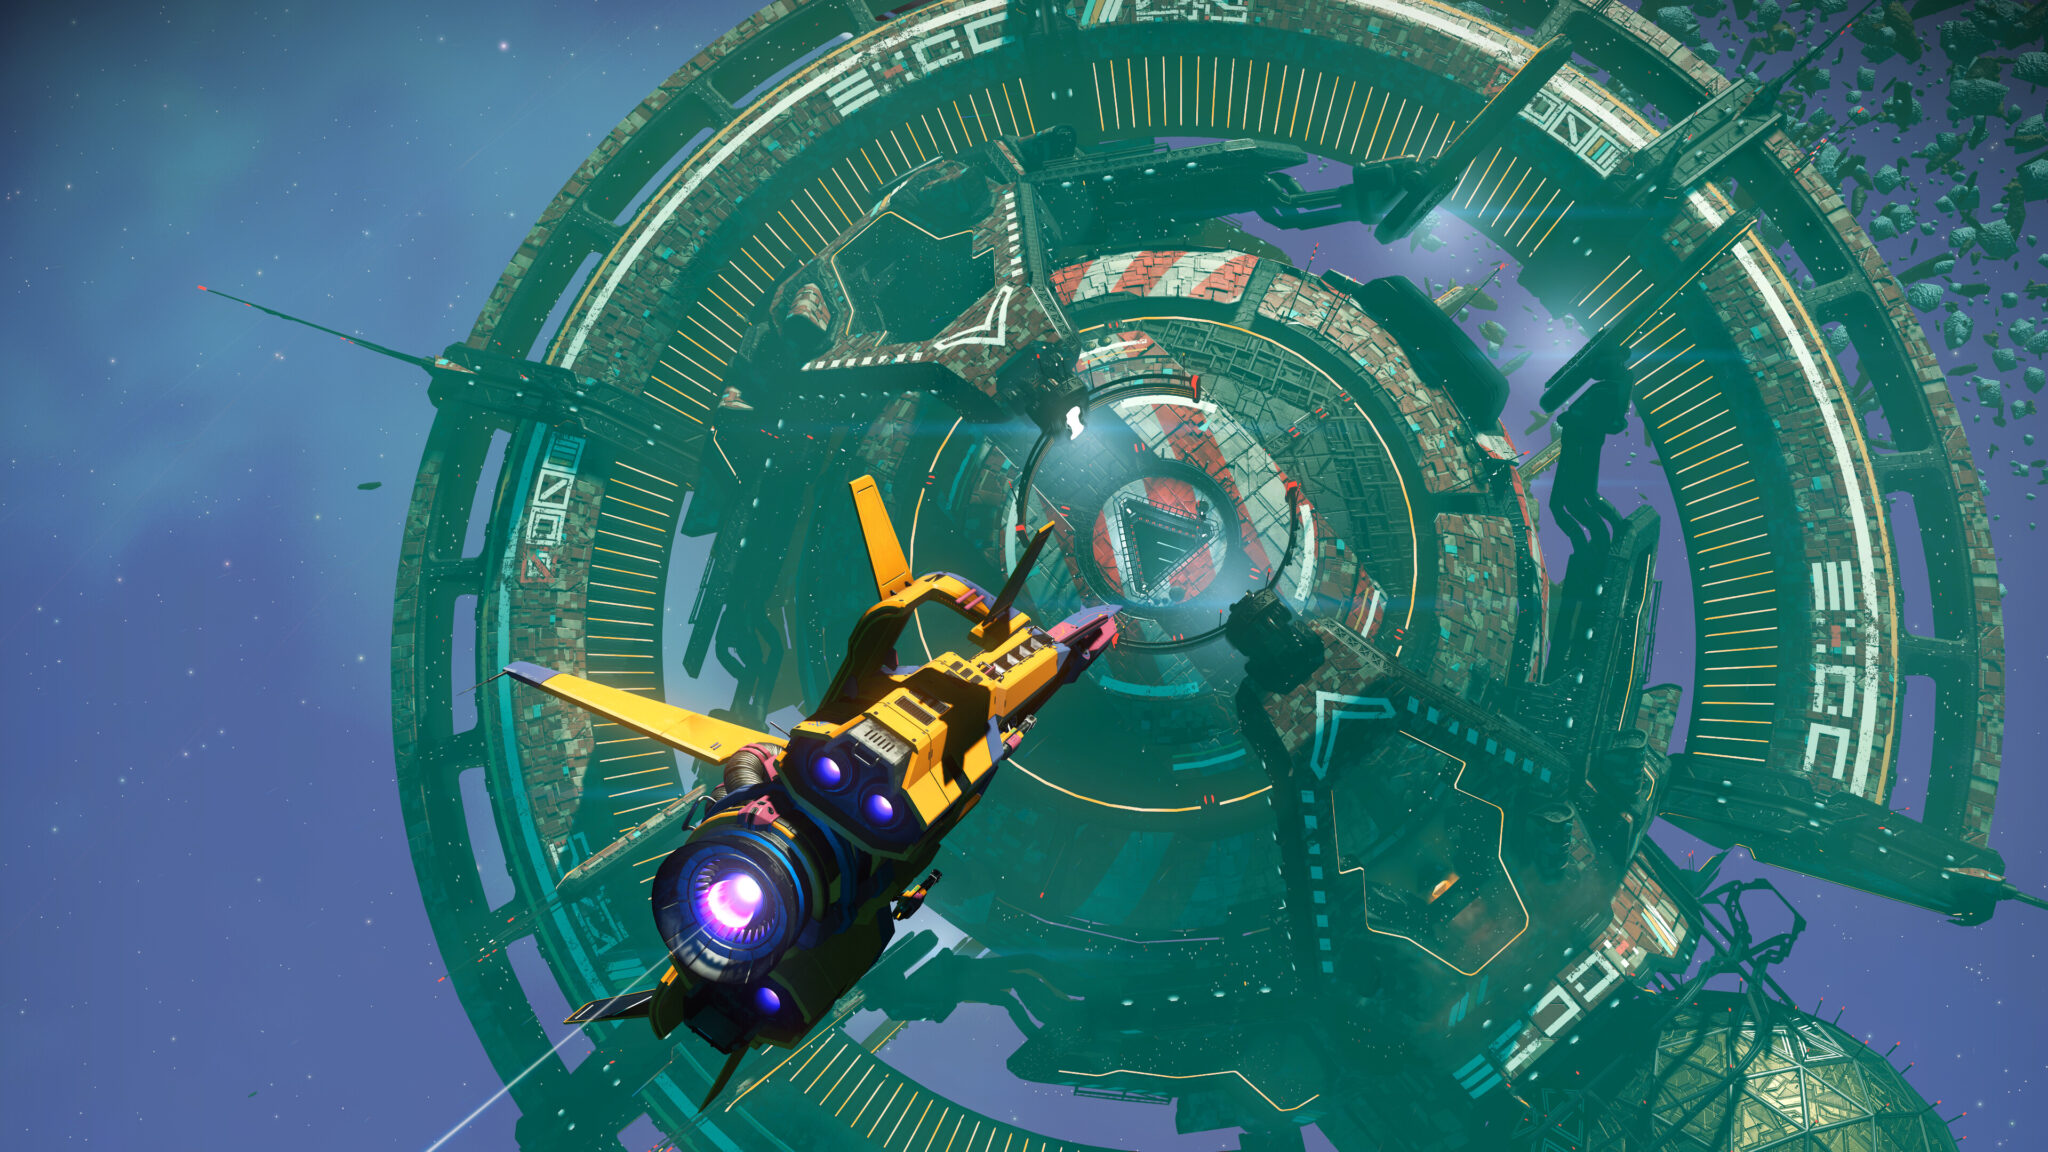 Latest No Man’s Sky update adds ship customisation, new Guild system, space station overhaul, and more